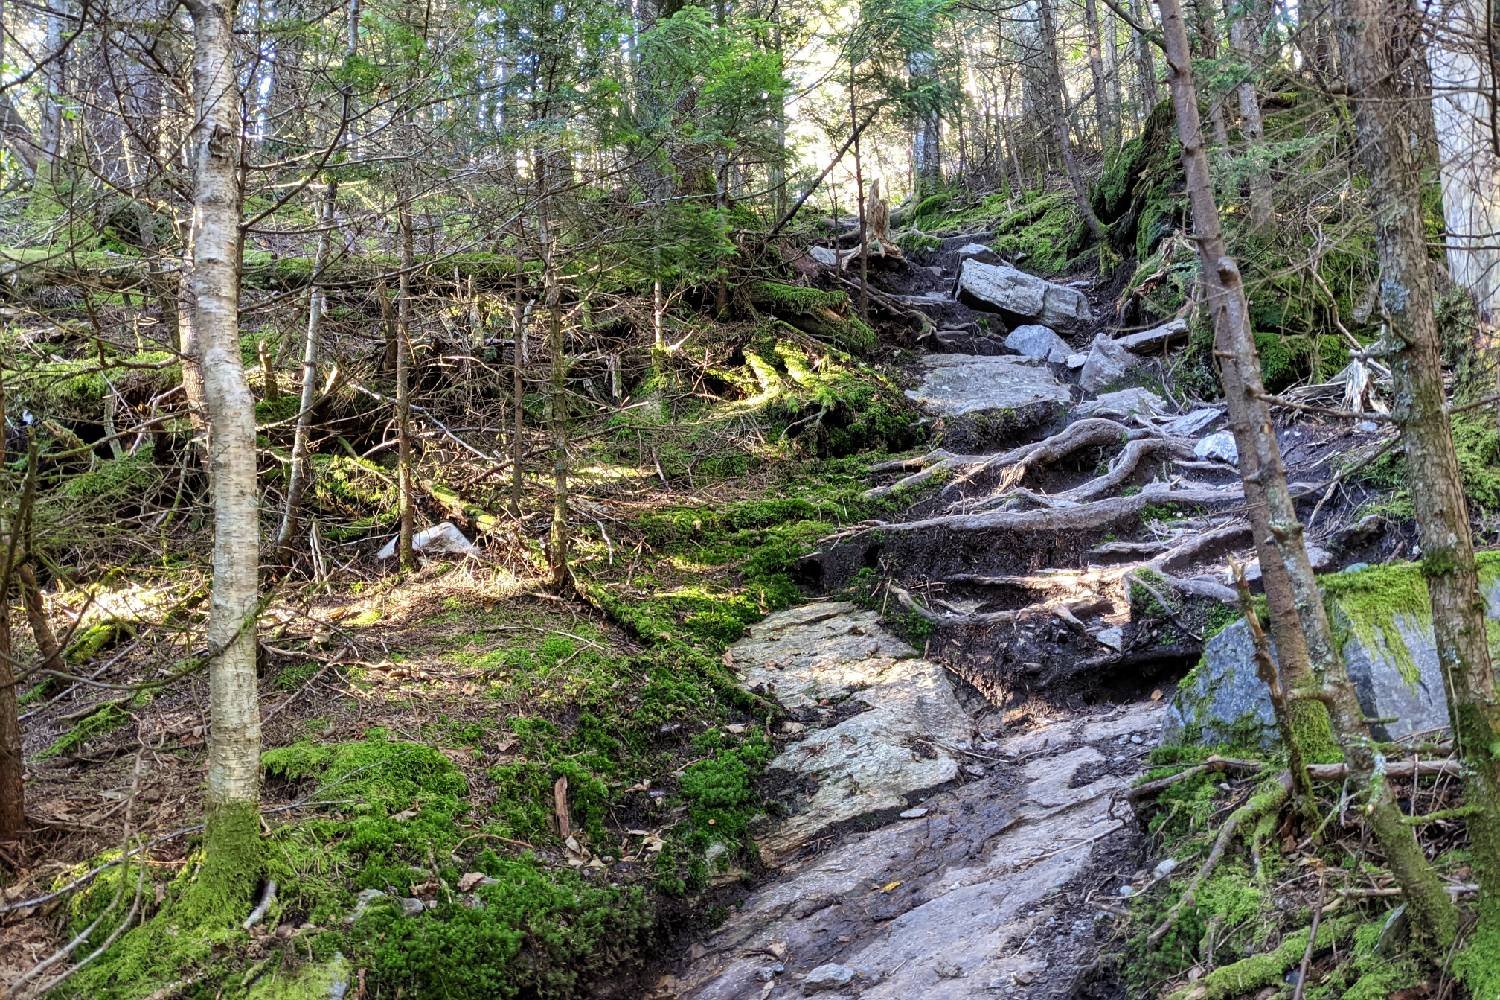 A section of the Long Trail covered in rocks and roots